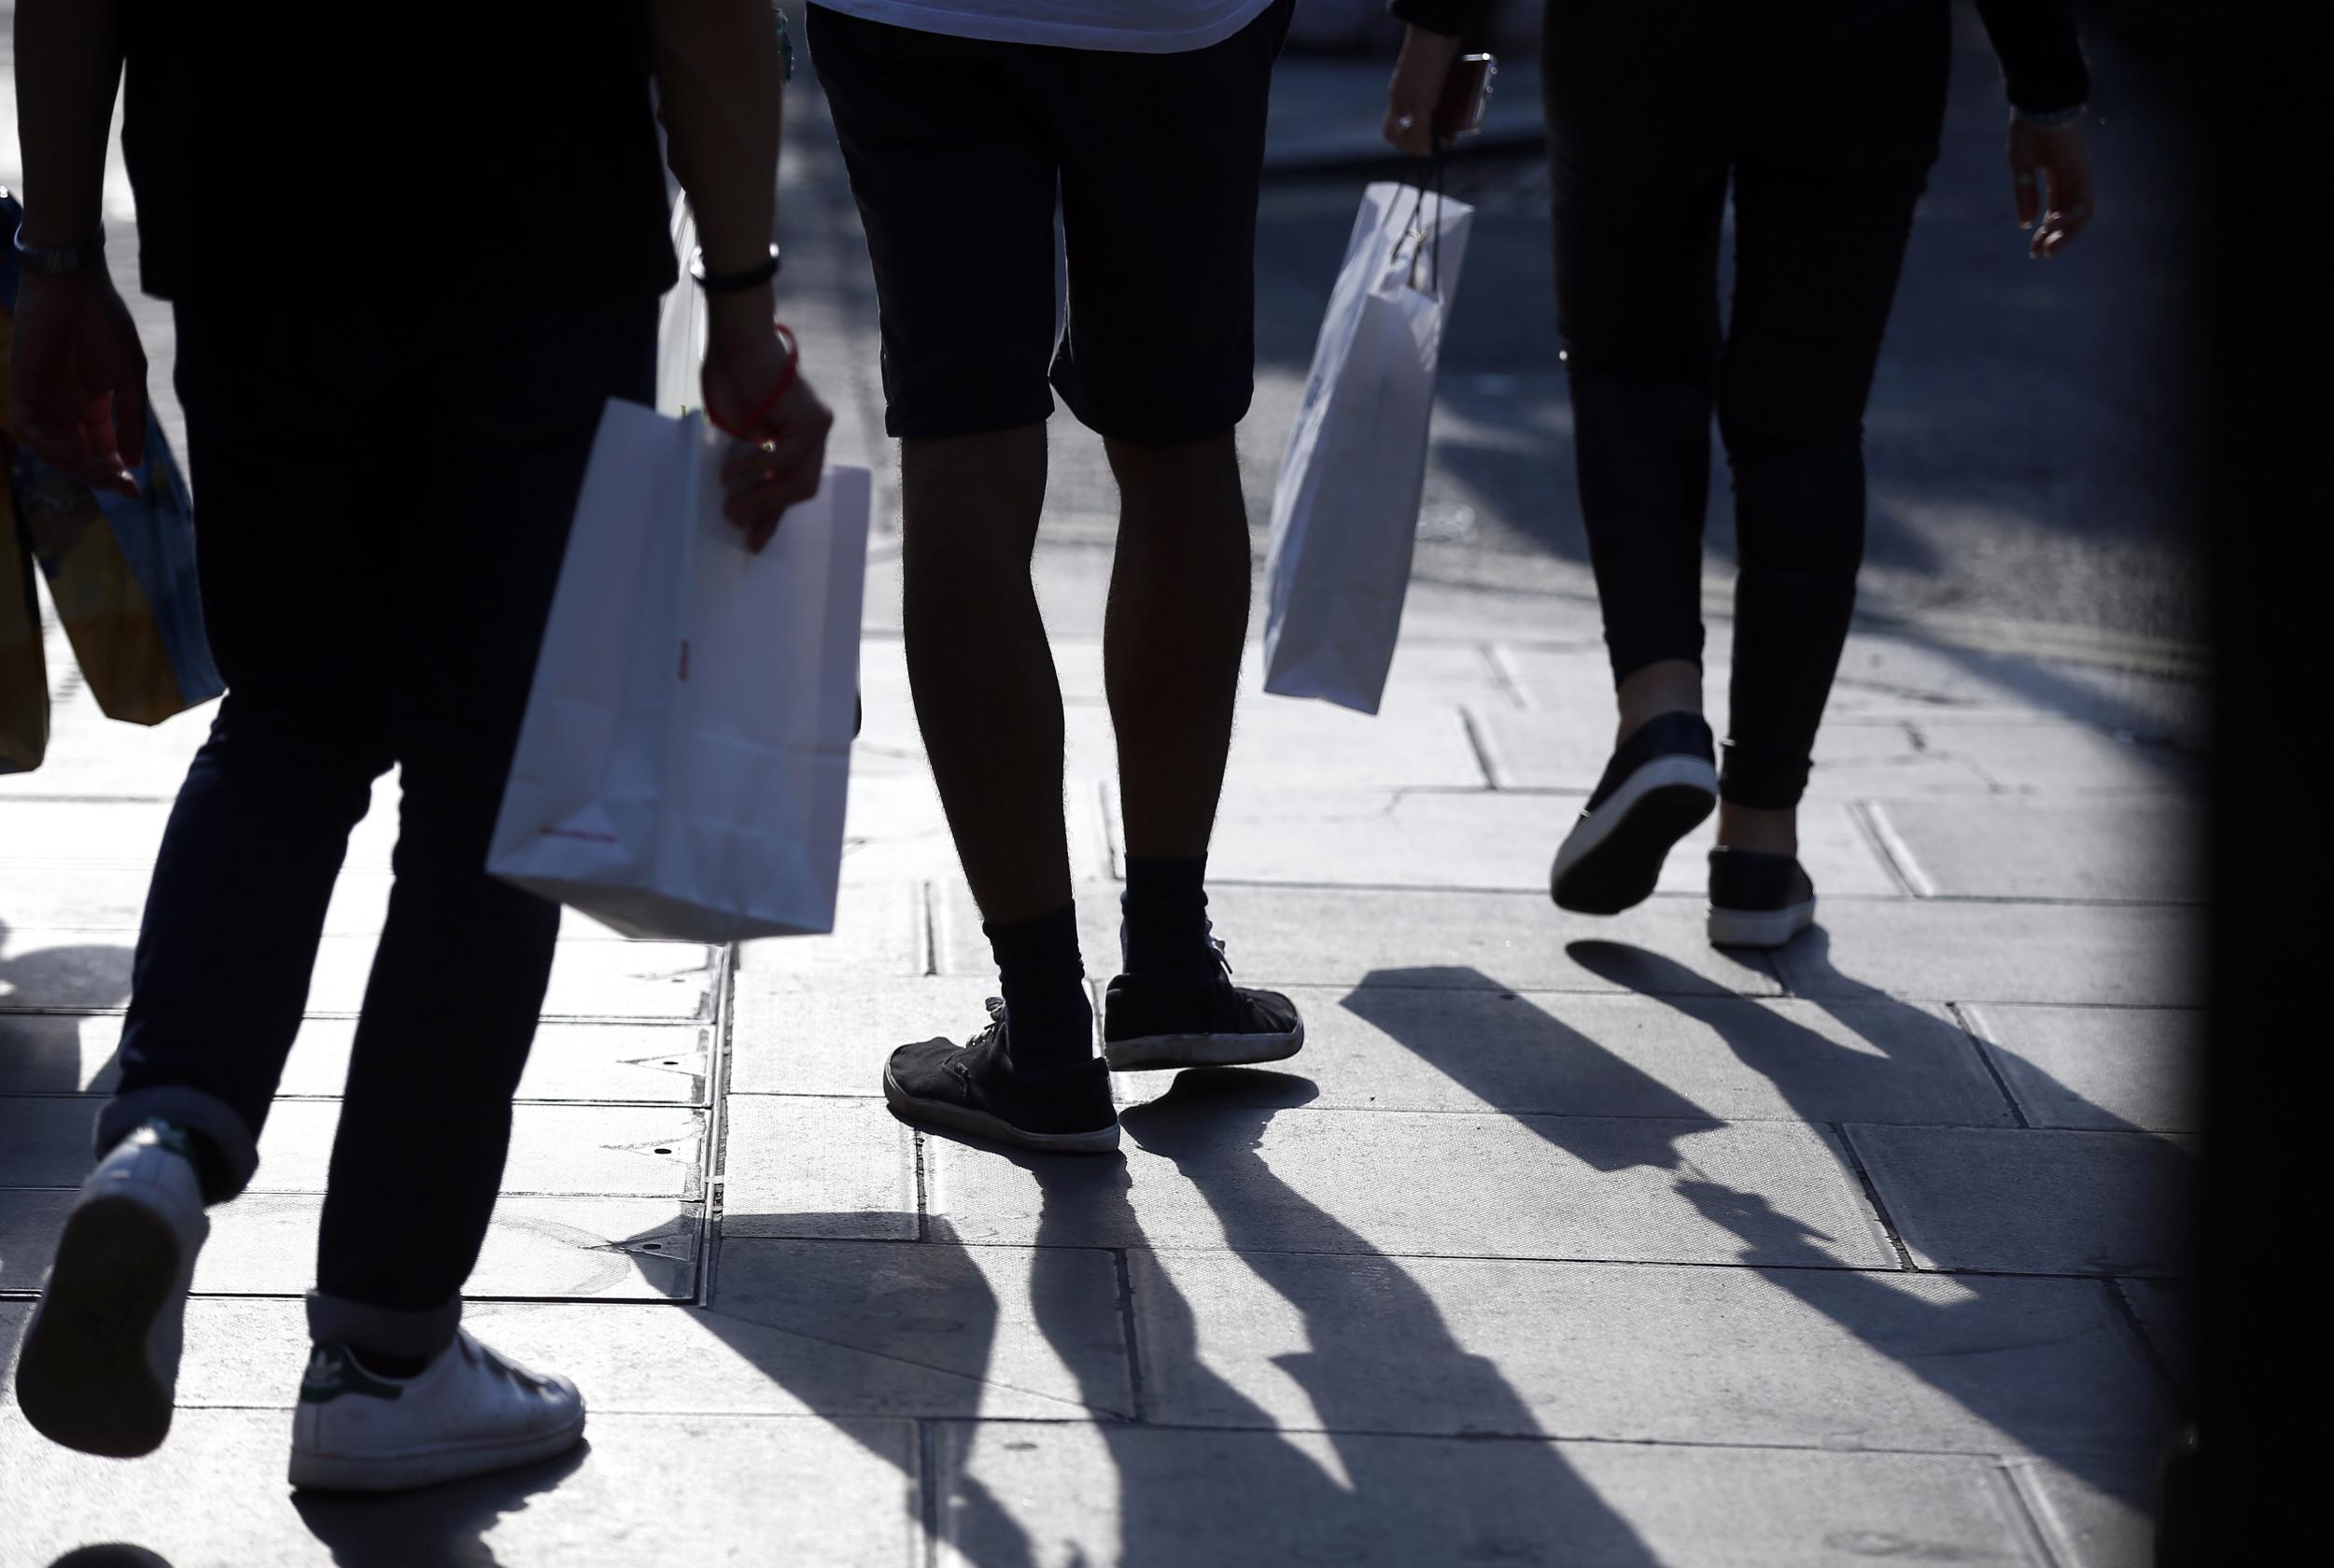 The hot weather has encouraged shoppers to hit the high street